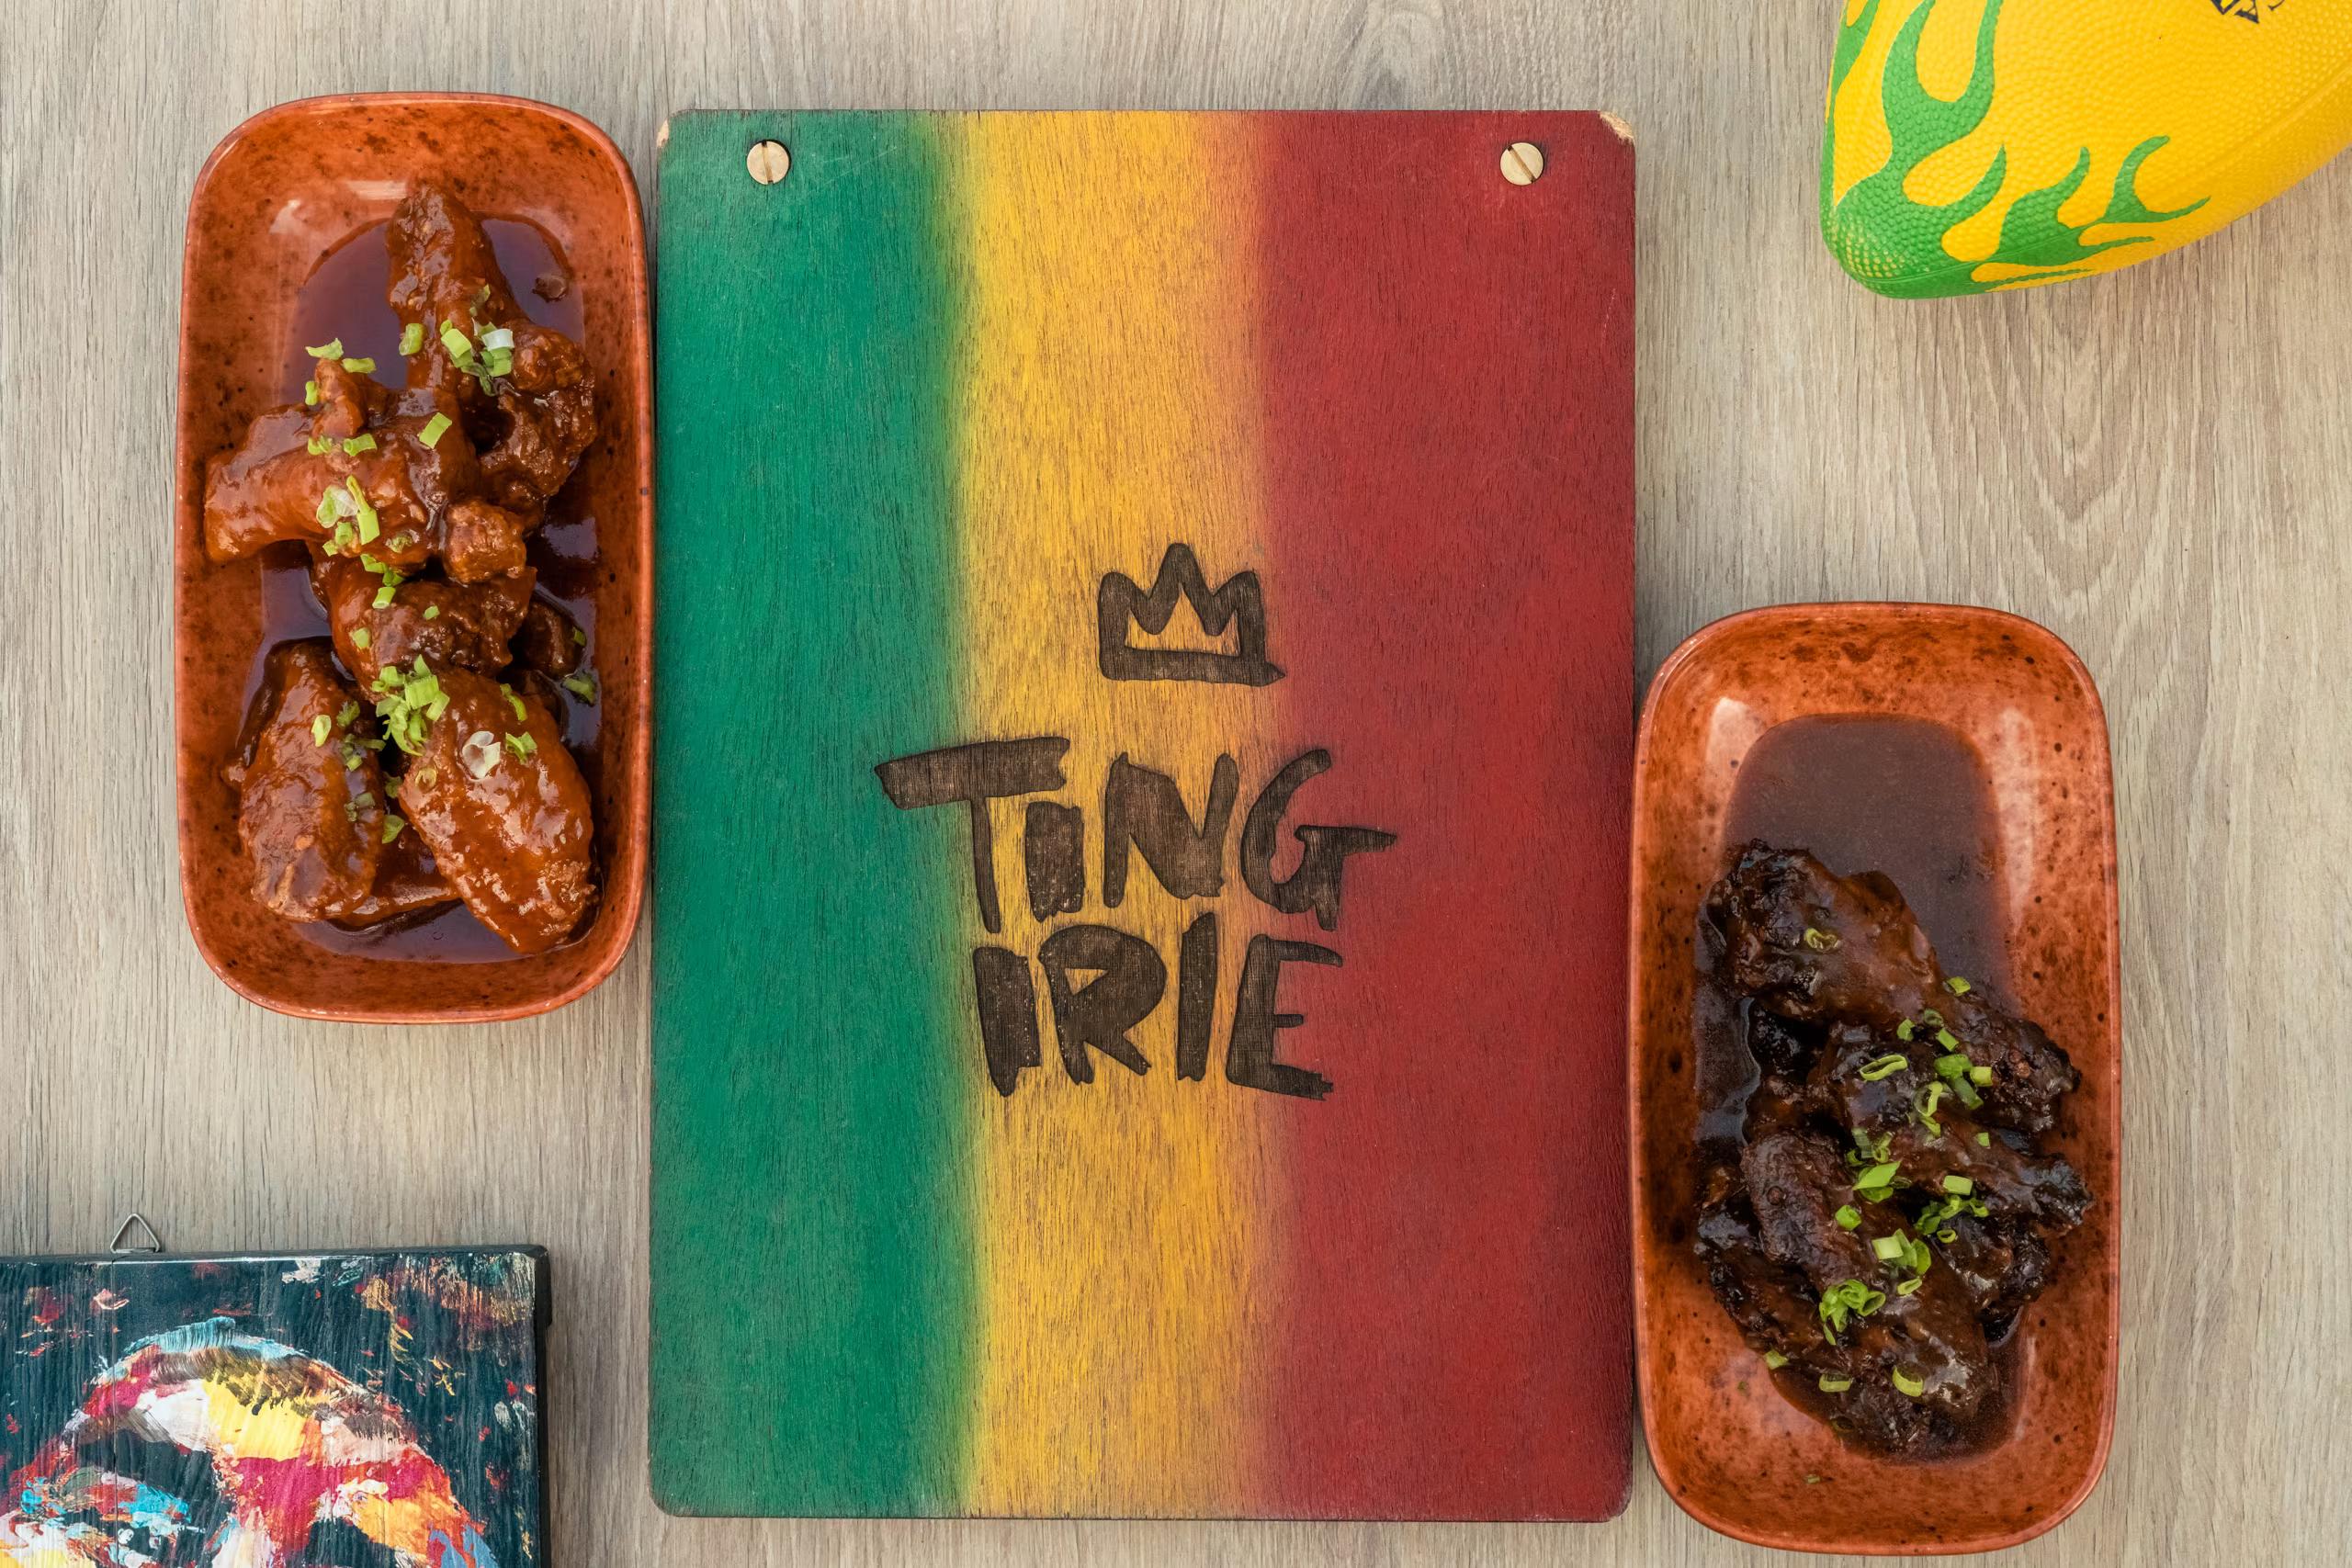 Ting Irie Abu Dhabi: A Sizzling Season of Afro-Caribbean Delights for 2023/2024